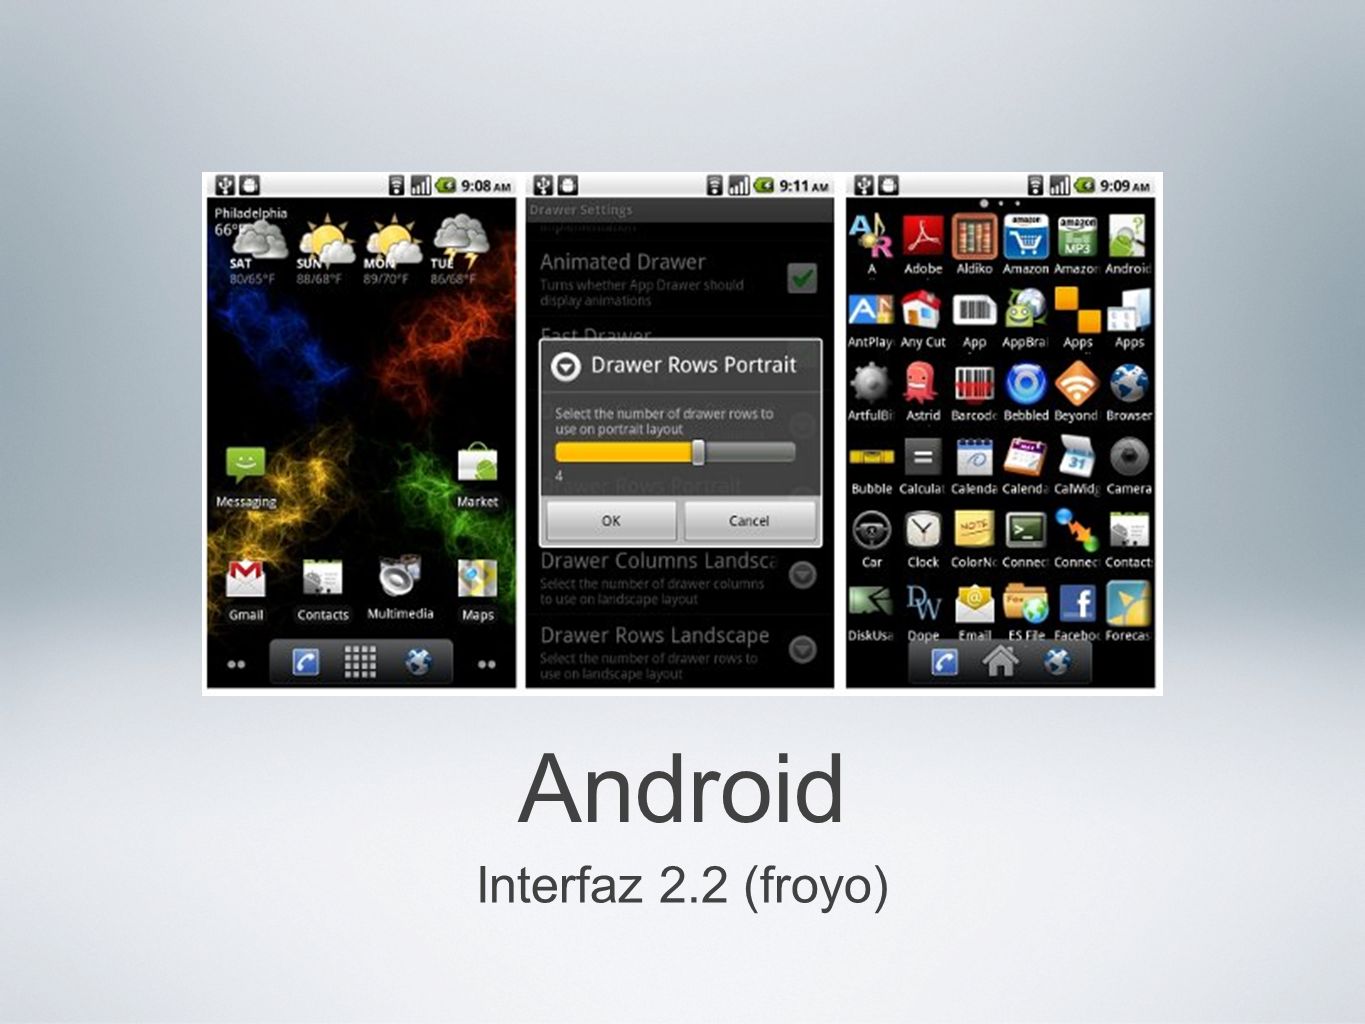 Android Interfaz 2.2 (froyo)